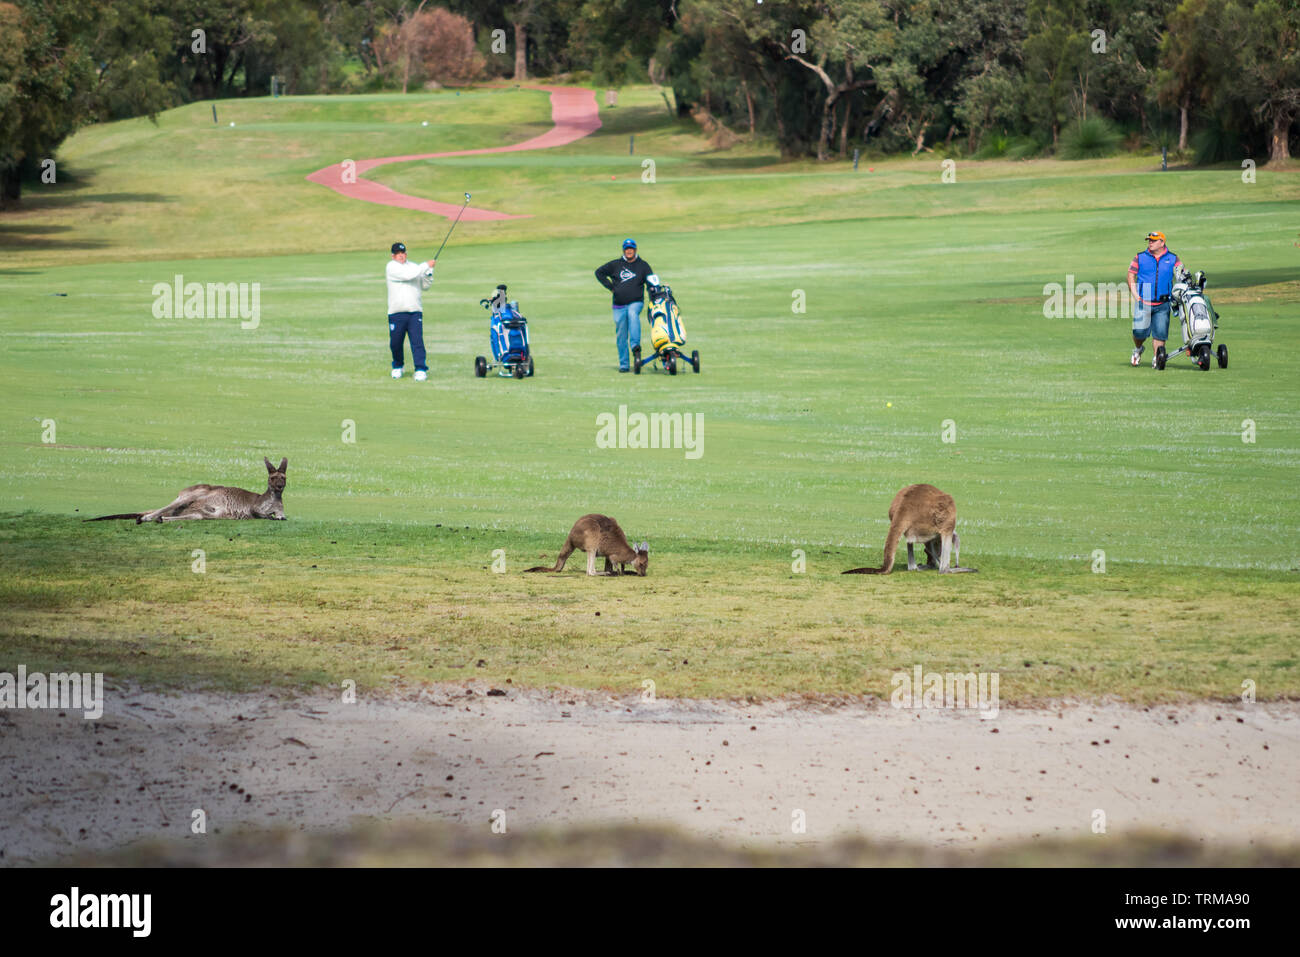 Kangaroos rest in the foreground while golfers enjoy a round at Carramar golf course in the northern suburbs of Perth, Western Australia. Stock Photo